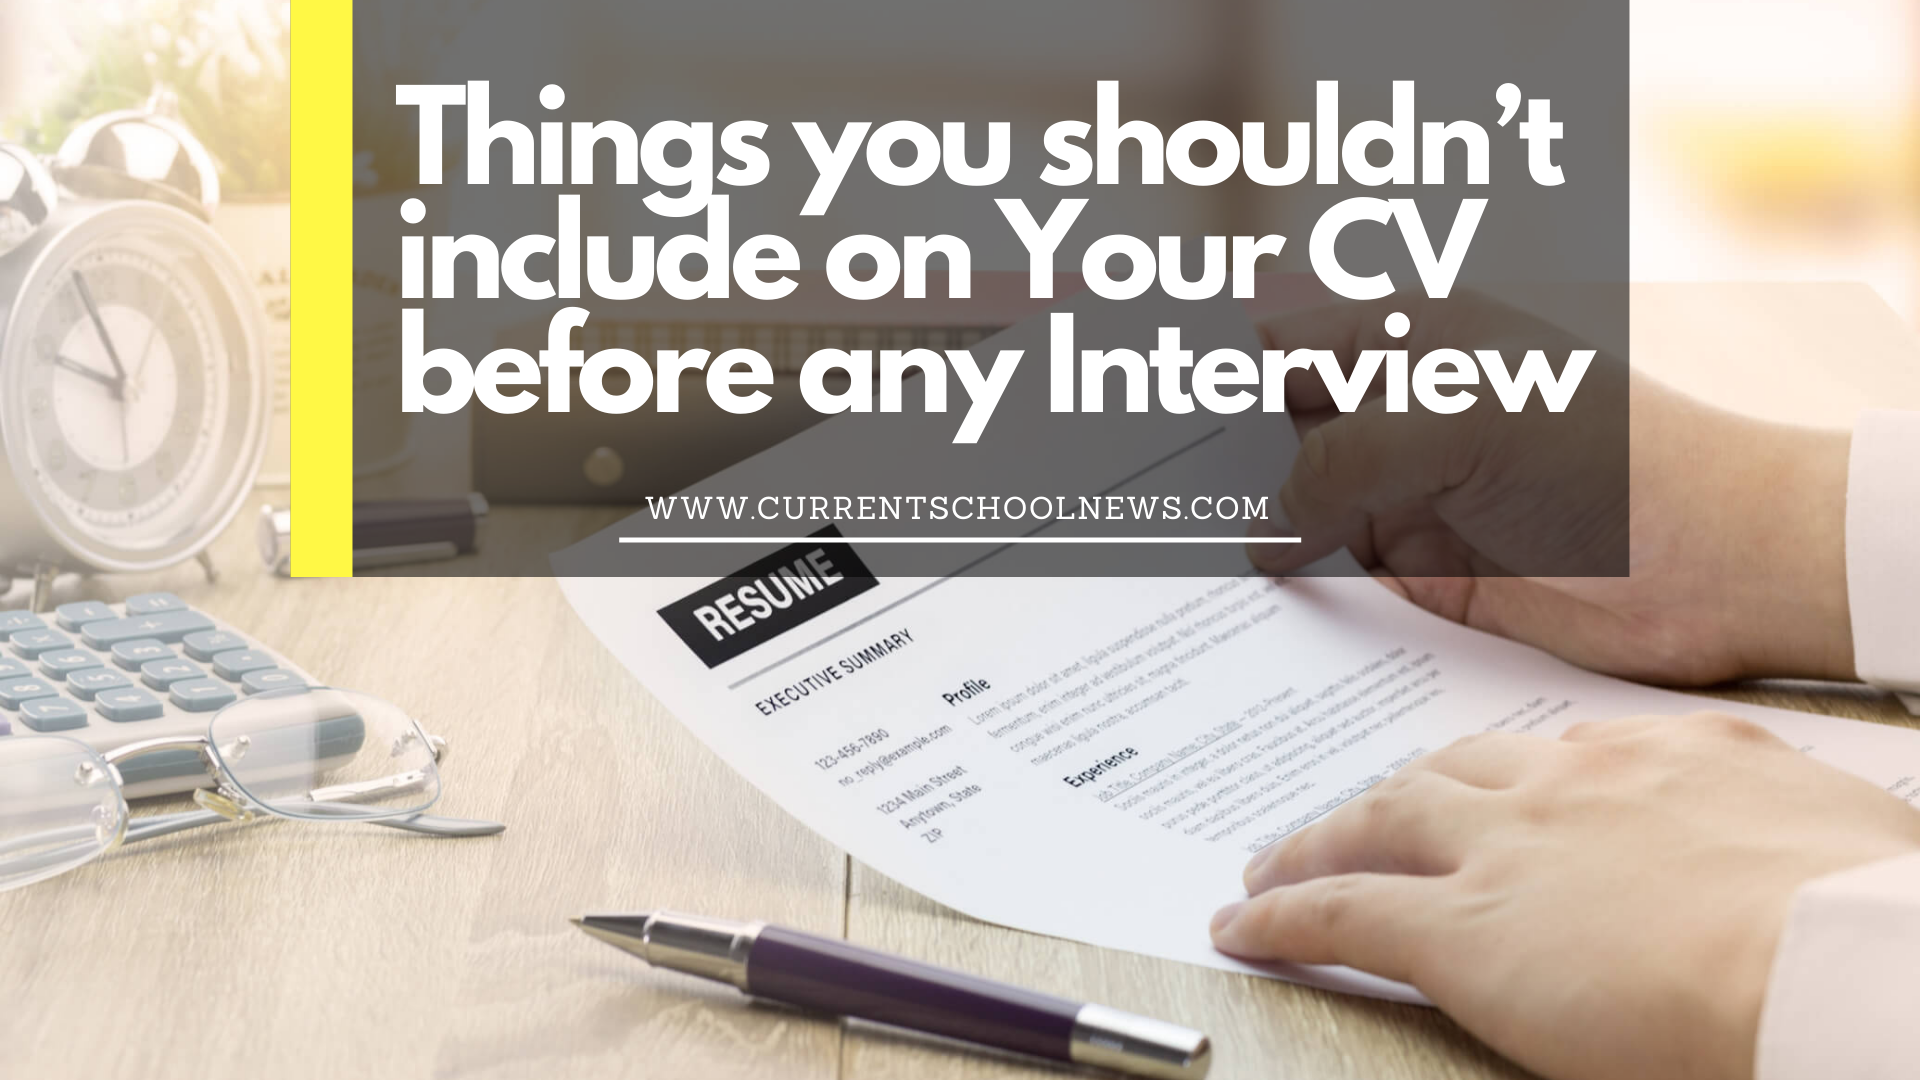 Things you shouldn’t include on Your CV before any Interview